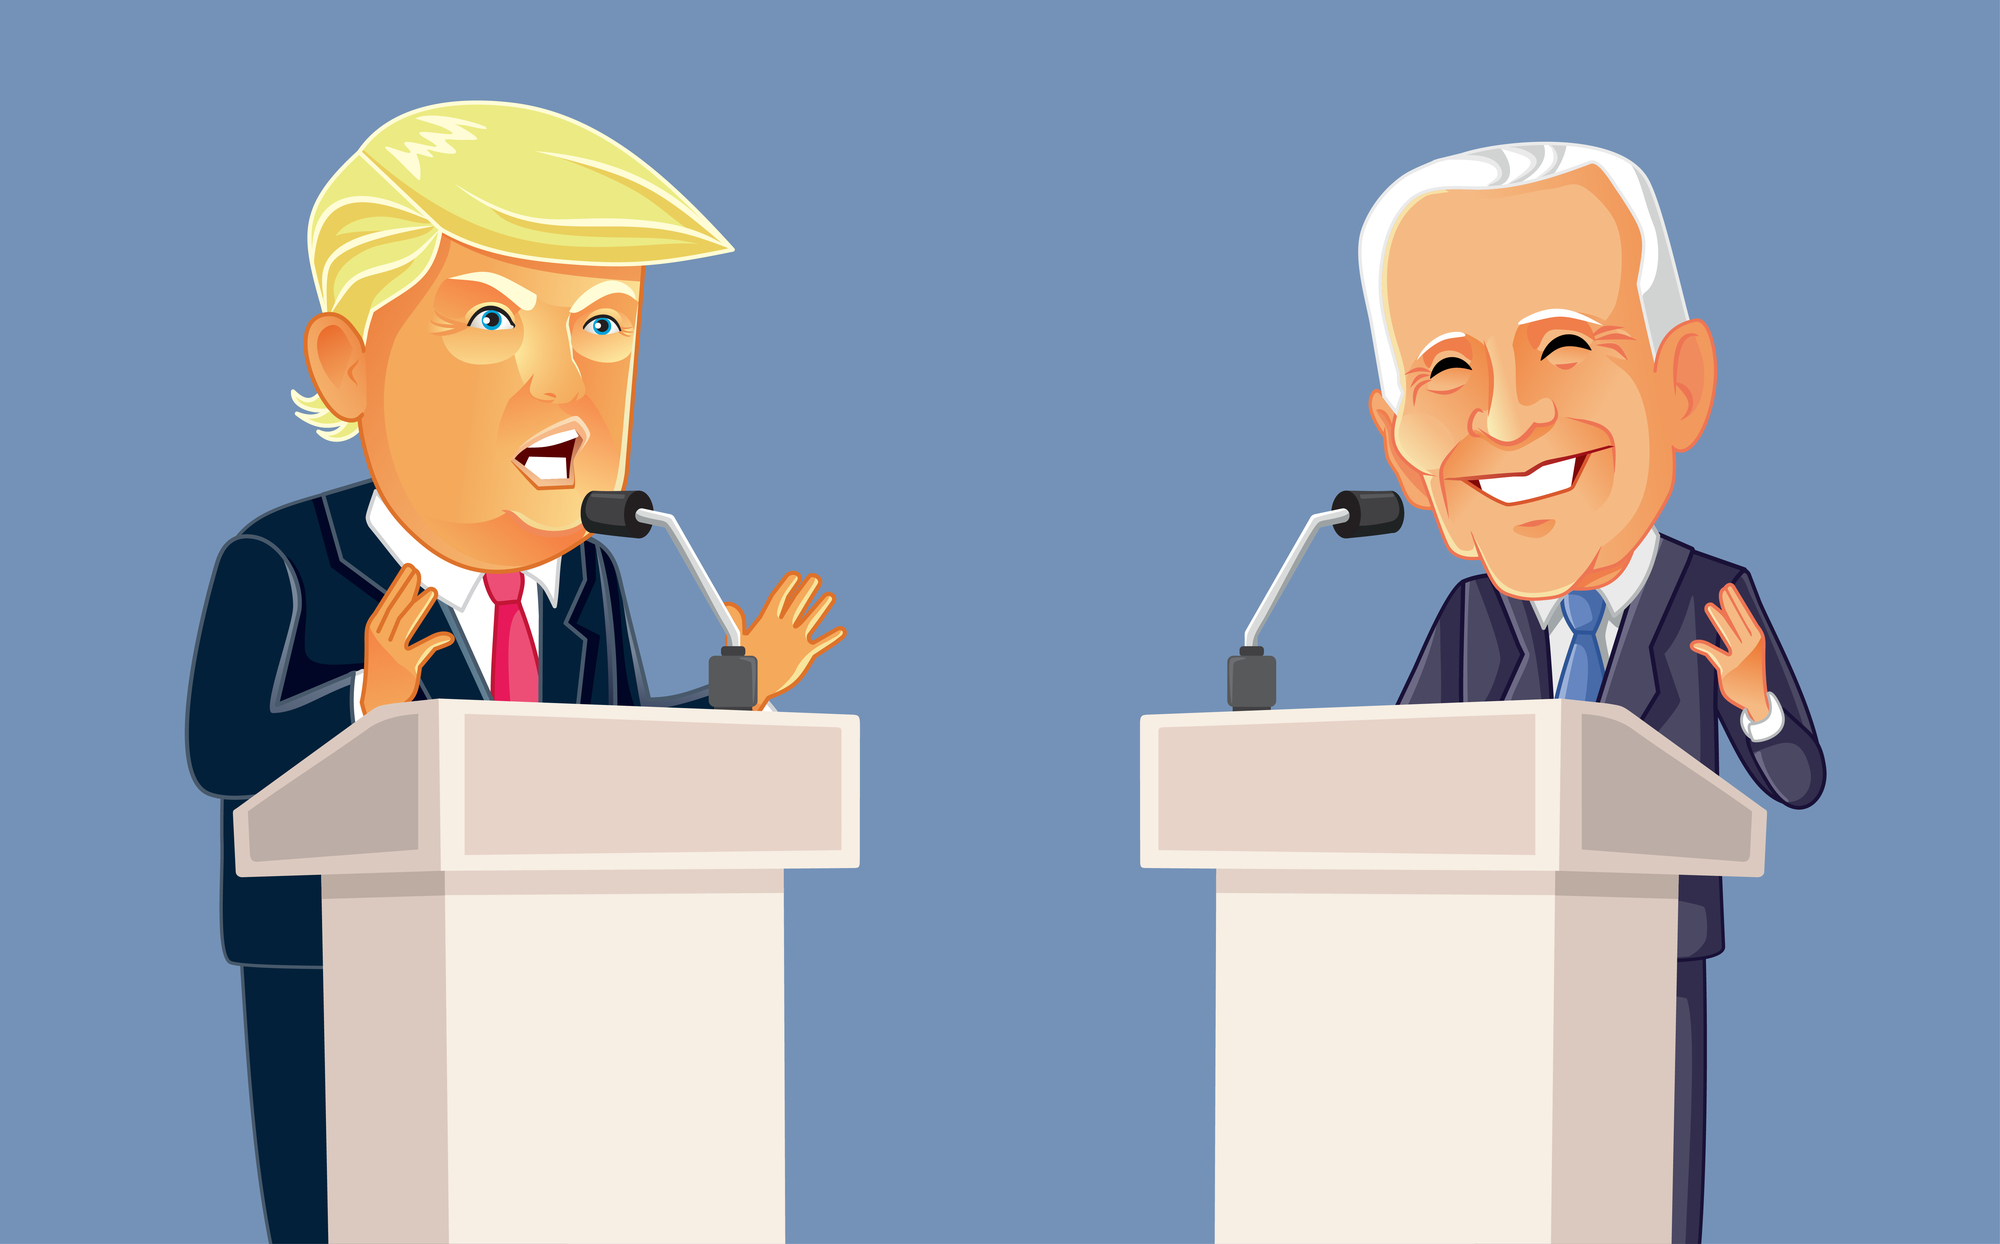 biden-leads-trump-in-latest-poll-but-it-is-a-tight-battle-for-the-presidency